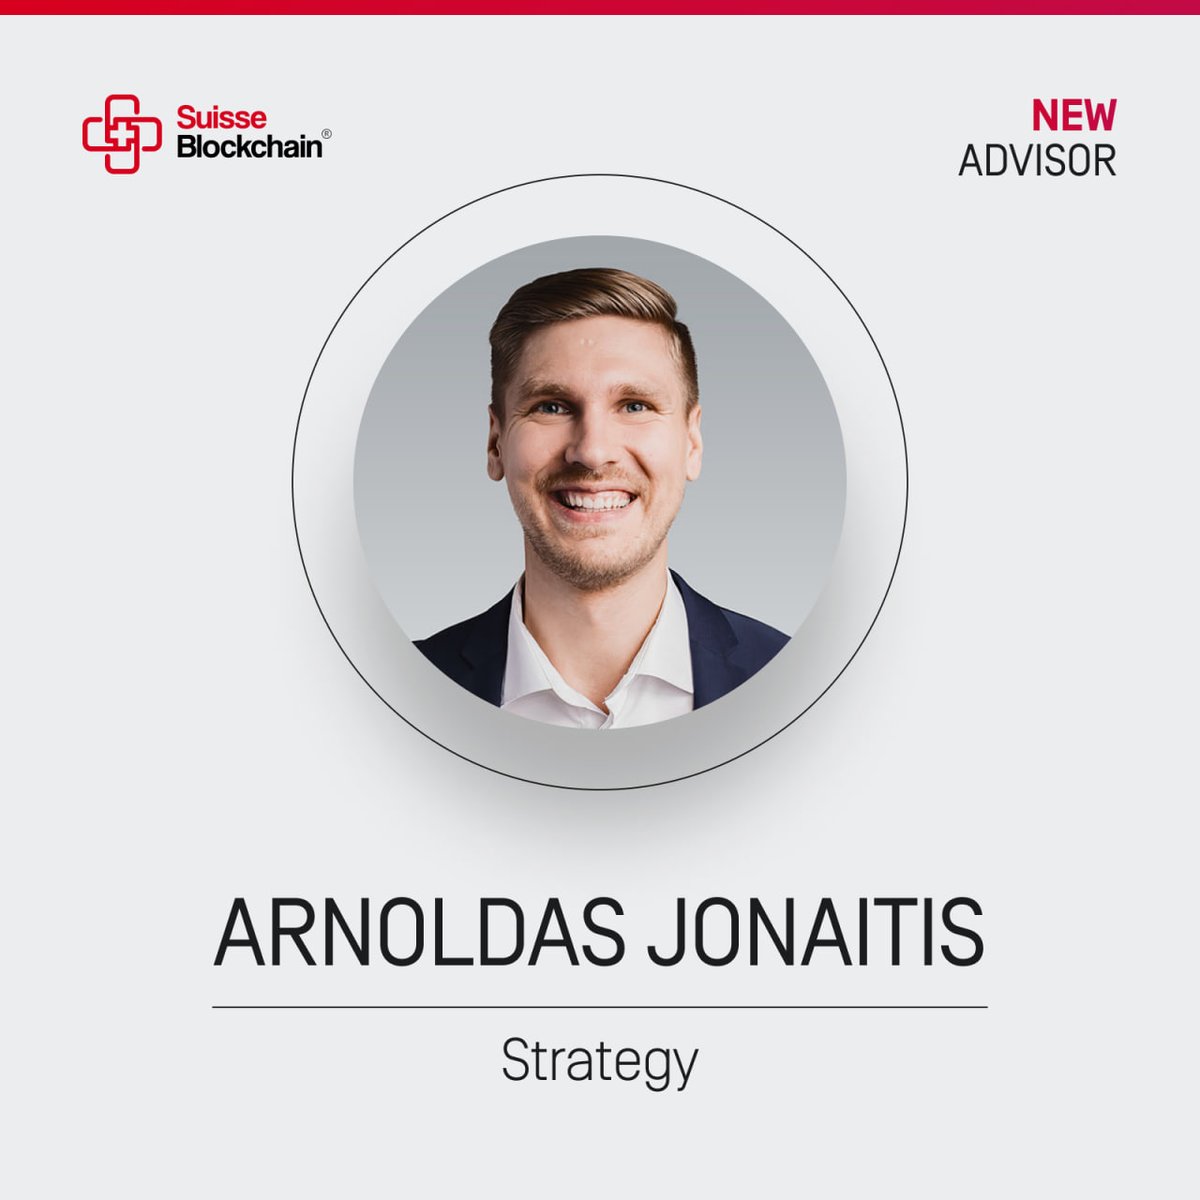 Arnoldas Jonaitis joins Suisse Blockchain as an Advisor! With 7+ years in blockchain and deep expertise in Web3 advisory, Arnoldas is set to boost our strategic growth and global initiatives. Welcome aboard!